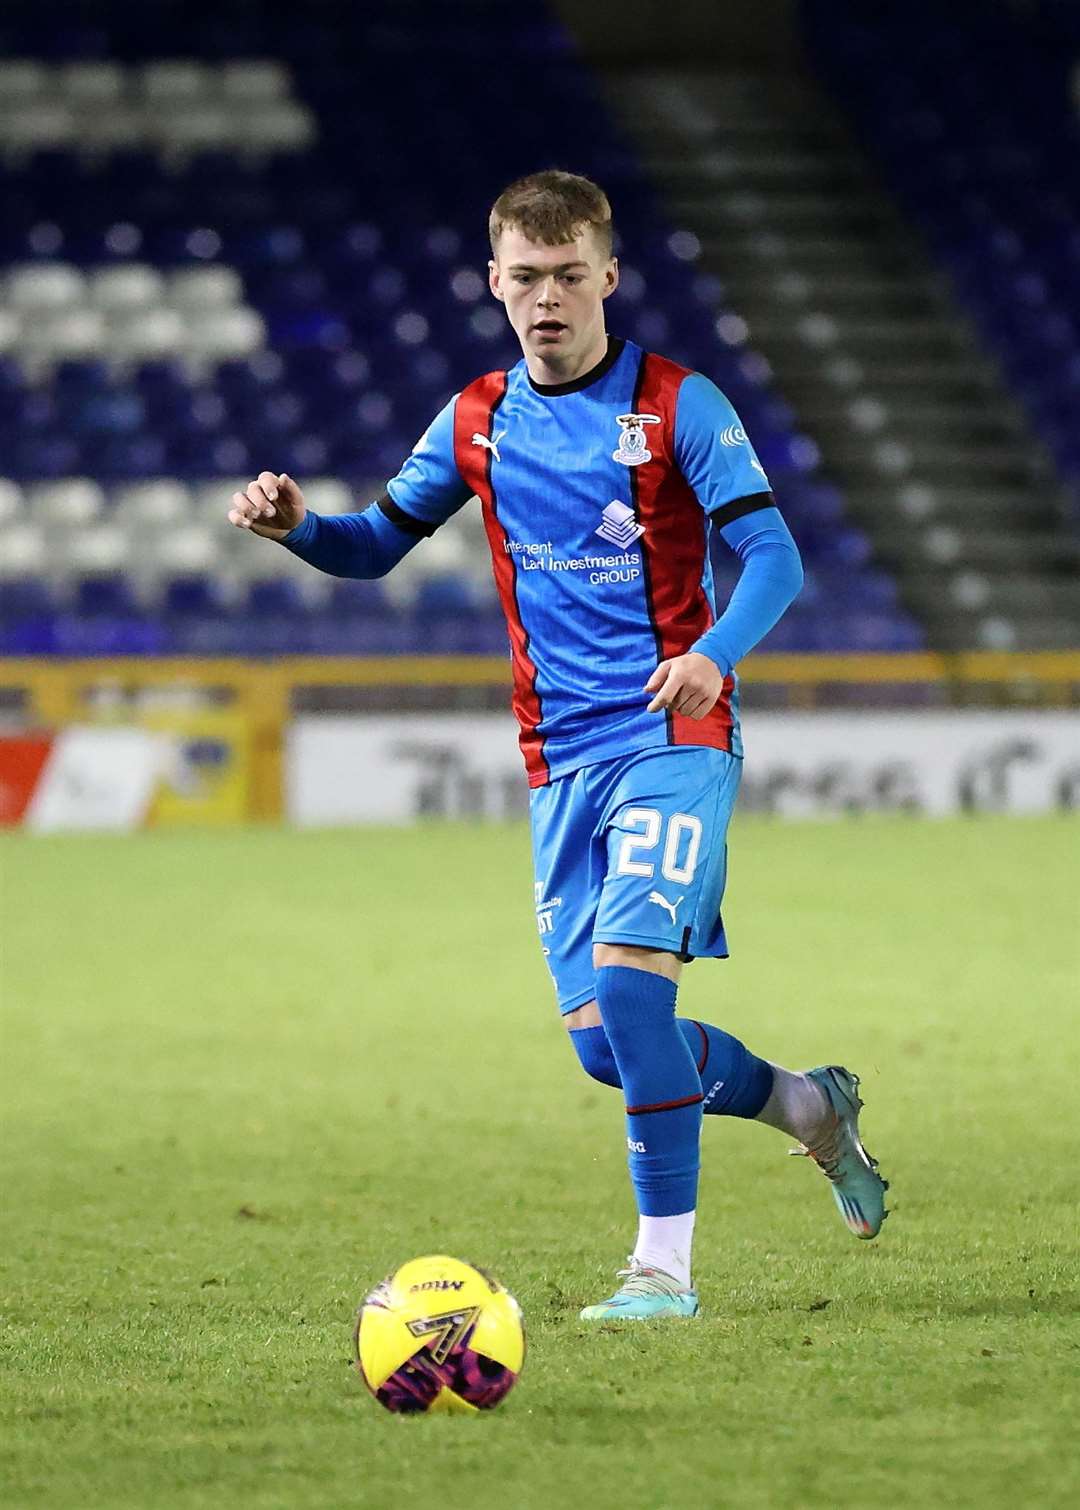 Dad who played for Ross County convinced son Jay Henderson on